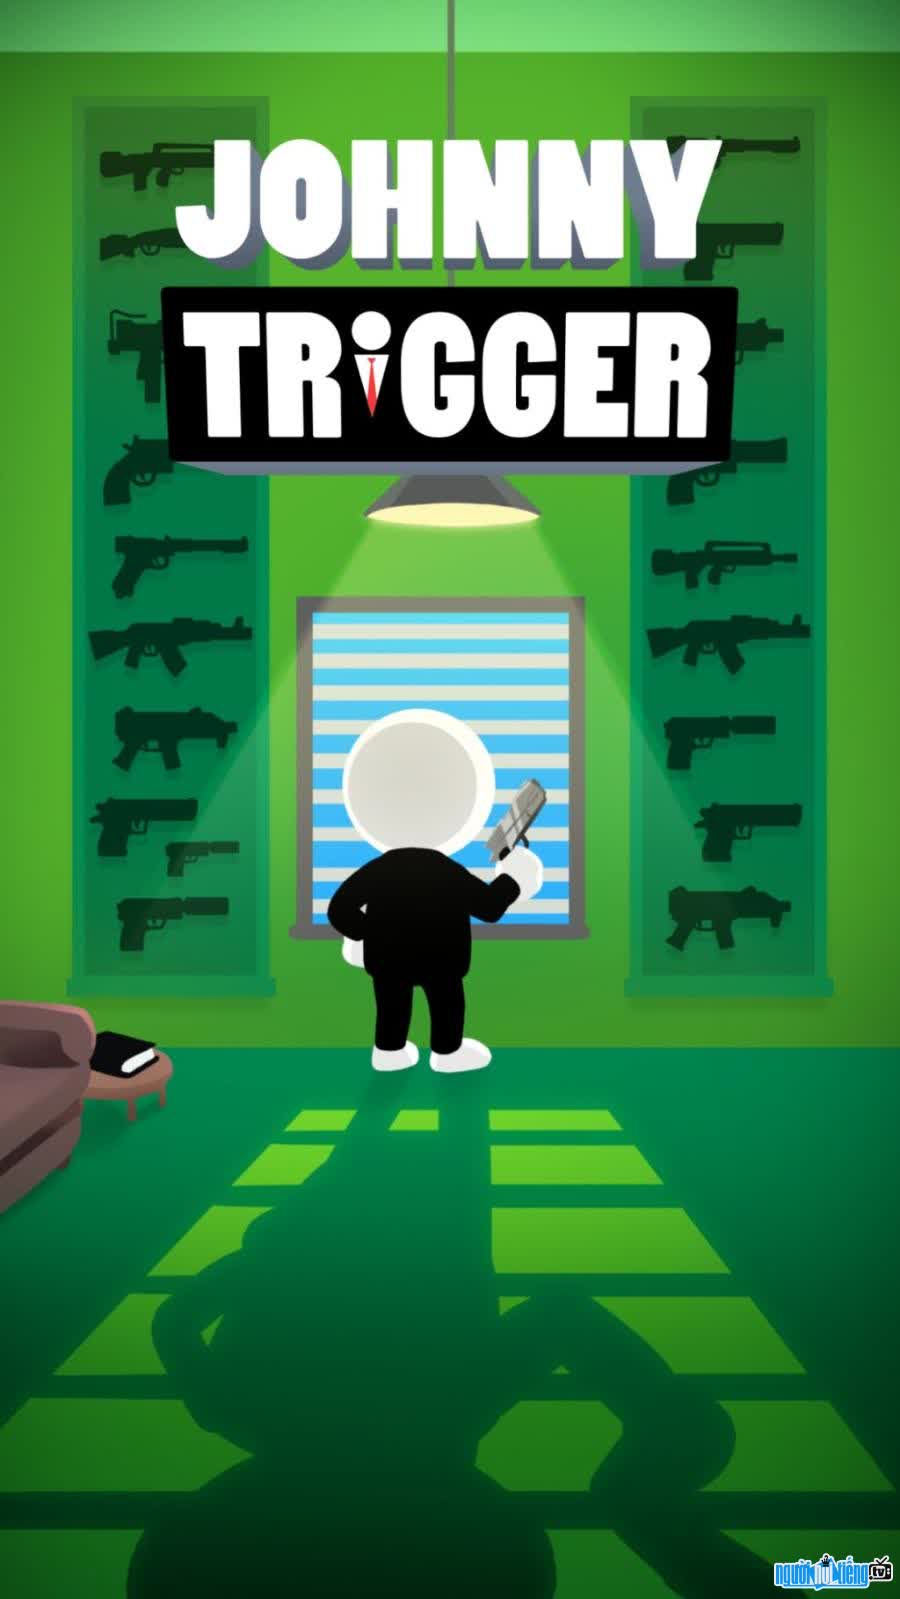 Johnny Trigger will bring players interesting experiences